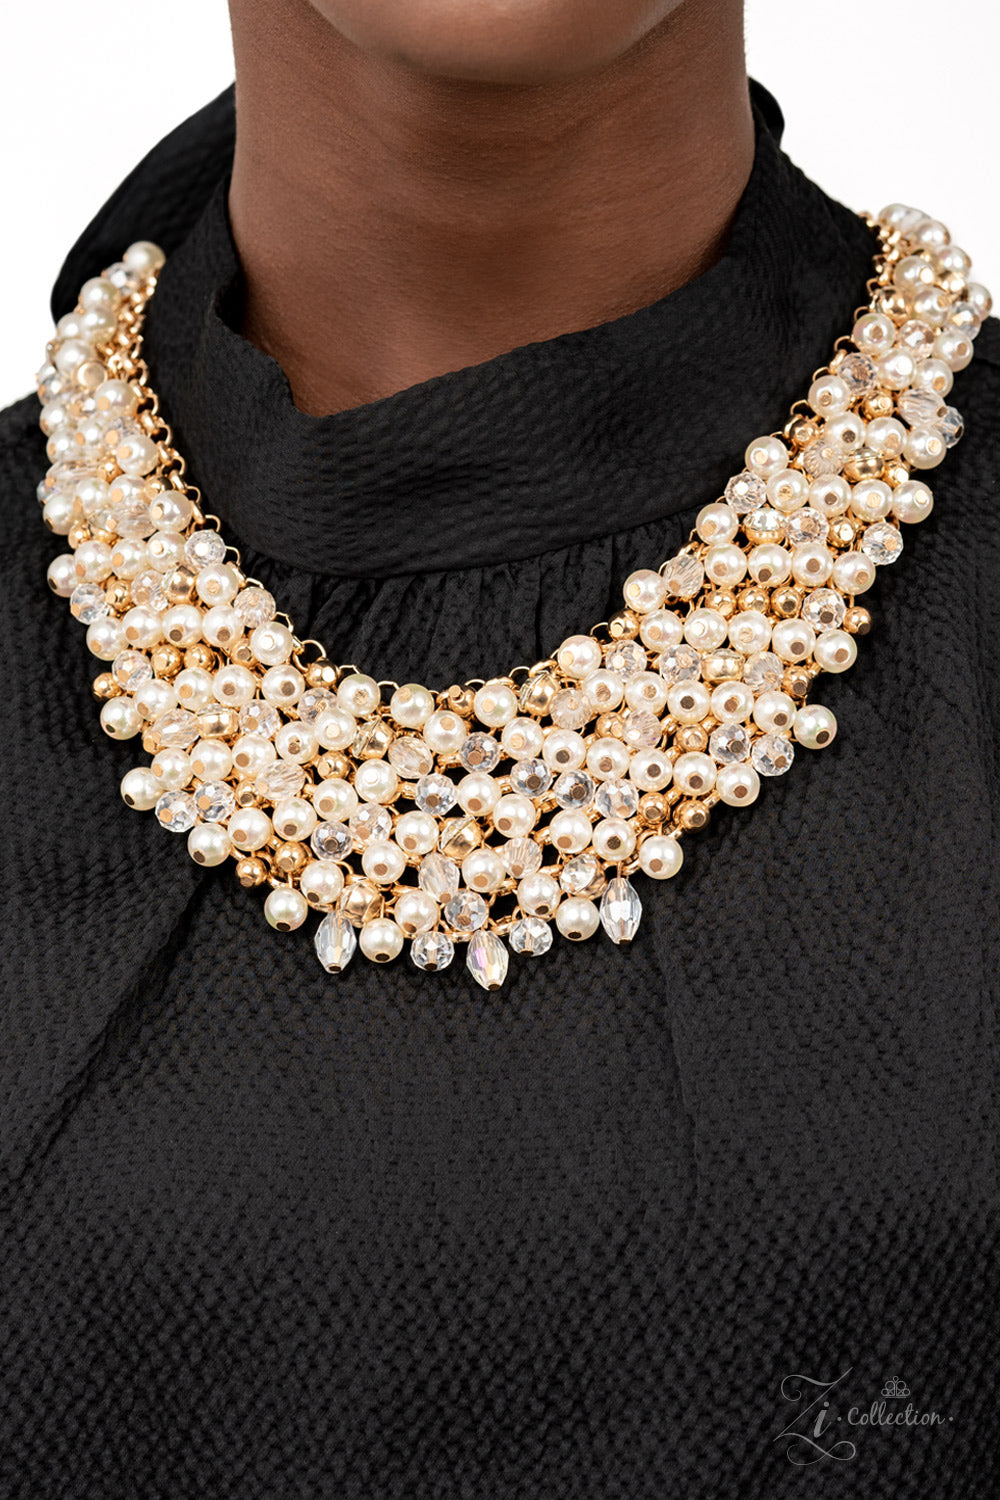 Sentimental 2021 Zi Collection Necklace - Paparazzi Accessories  Mesmerizingly mismatched crystal-like beads, white pearls, and classic white rhinestones delicately attach to a golden chain net below the collar. Jampacked with noise-making shimmer, the effervescently clustered fringe dances with each movement for an elegantly bubbly finish. Features an adjustable clasp closure.  Sold as one individual necklace. Includes one pair of matching earrings.